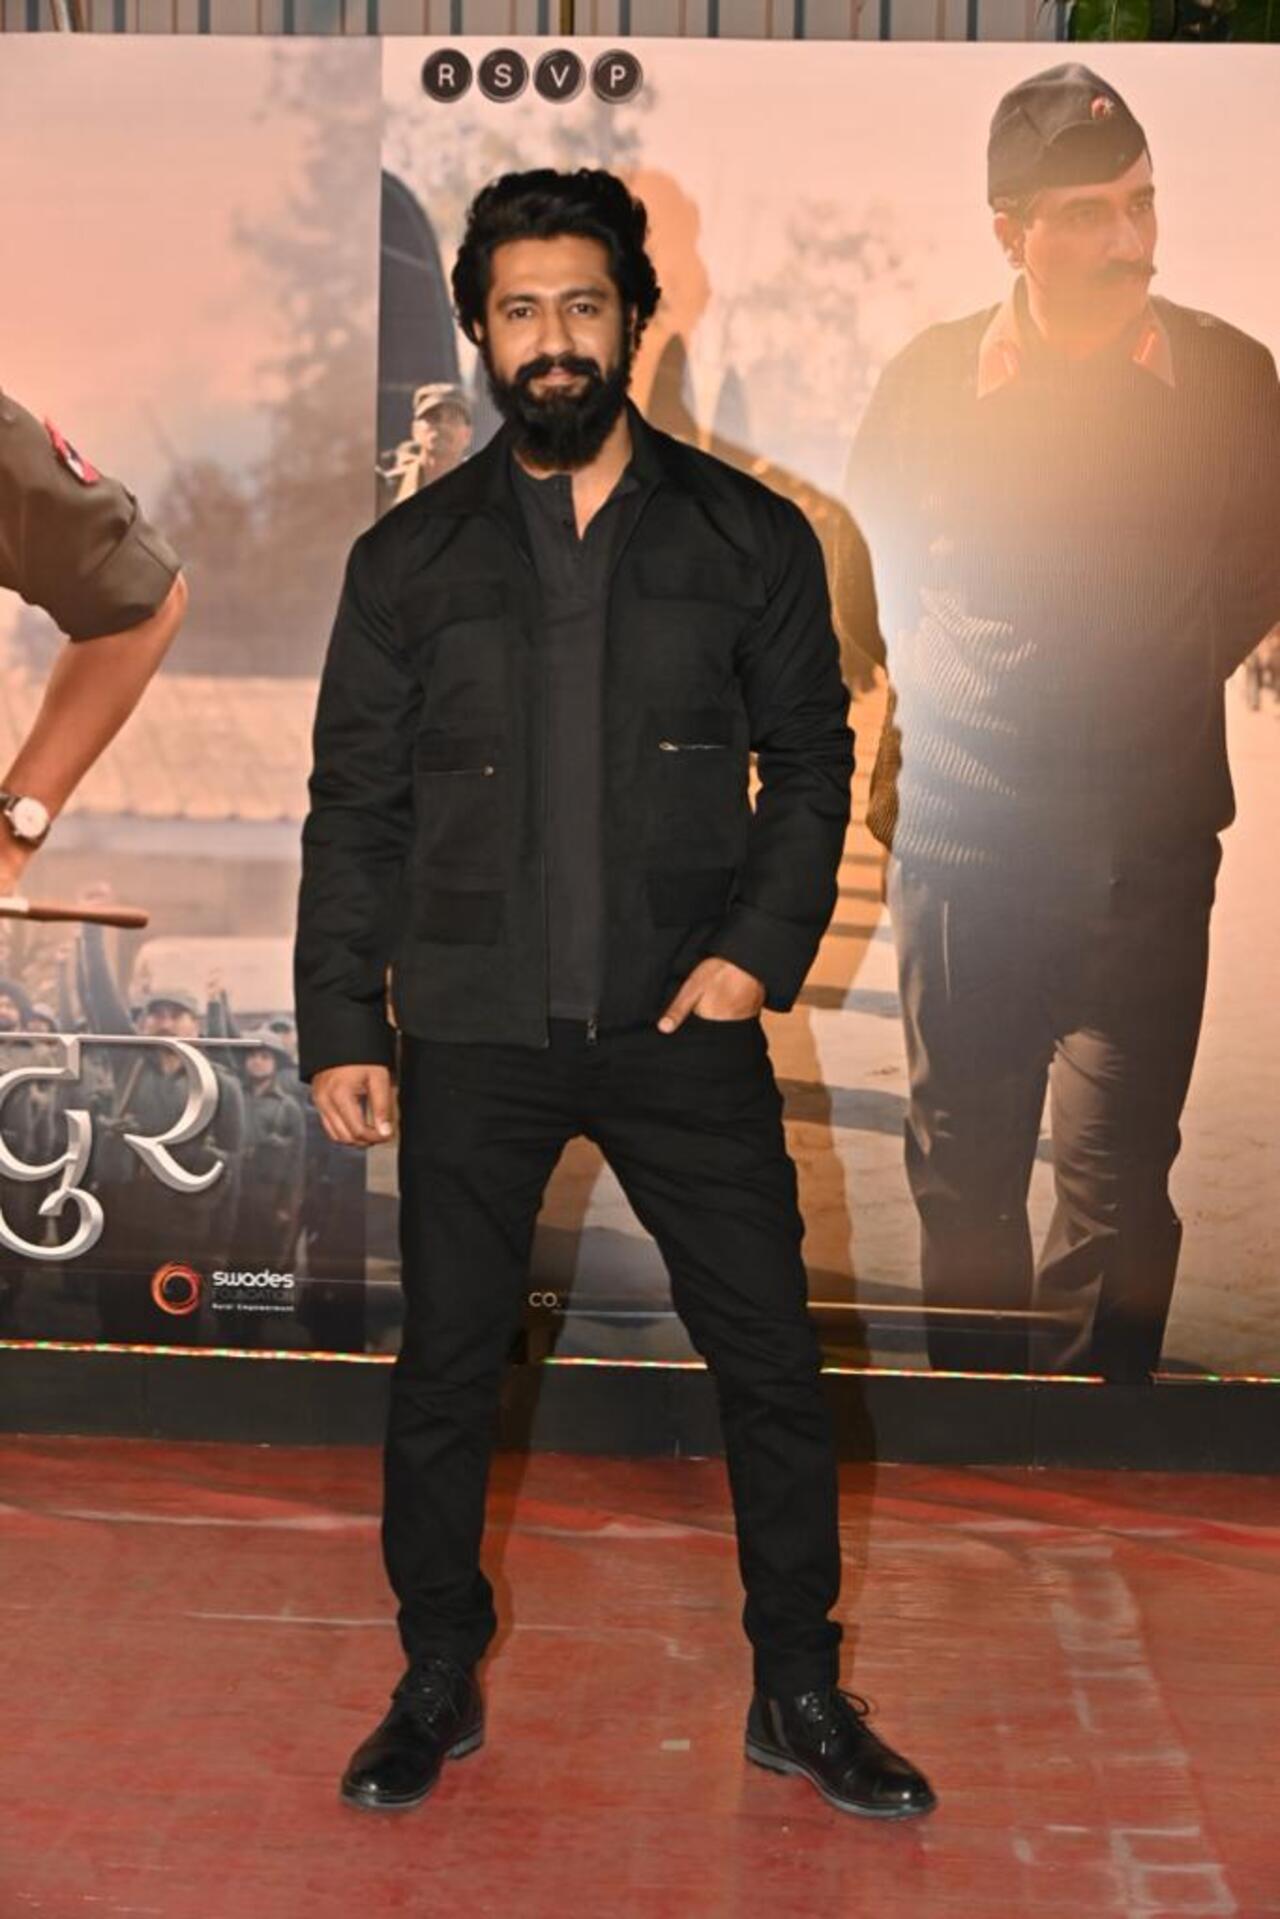 Vicky Kaushal, who plays the titular role in Sam Bahadur, attended the premiere of his film